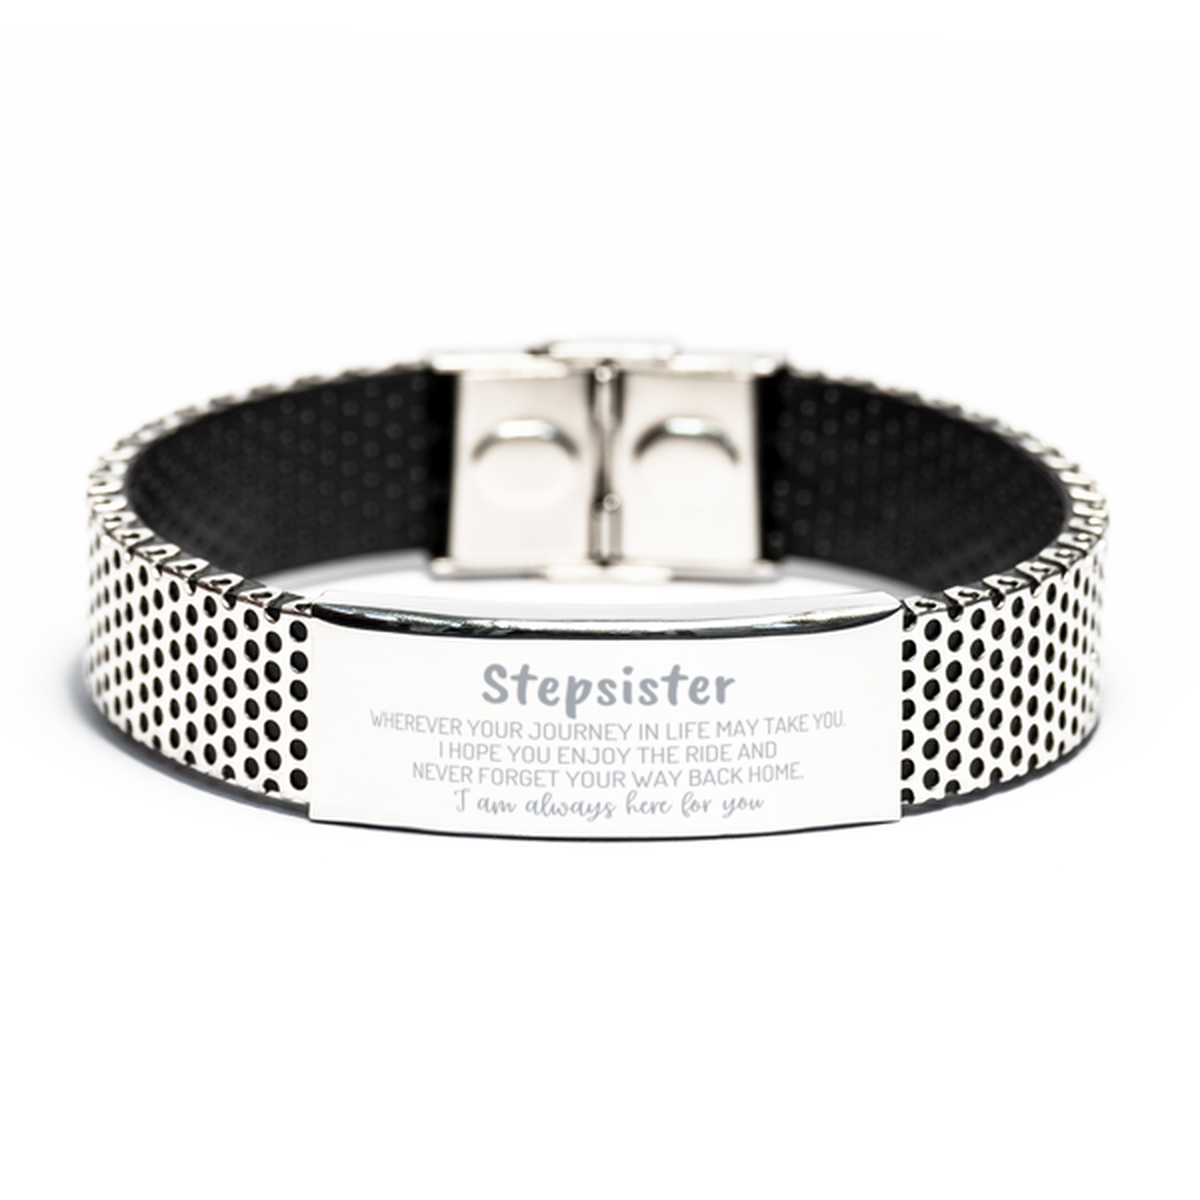 Stepsister wherever your journey in life may take you, I am always here for you Stepsister Stainless Steel Bracelet, Awesome Christmas Gifts For Stepsister, Stepsister Birthday Gifts for Men Women Family Loved One